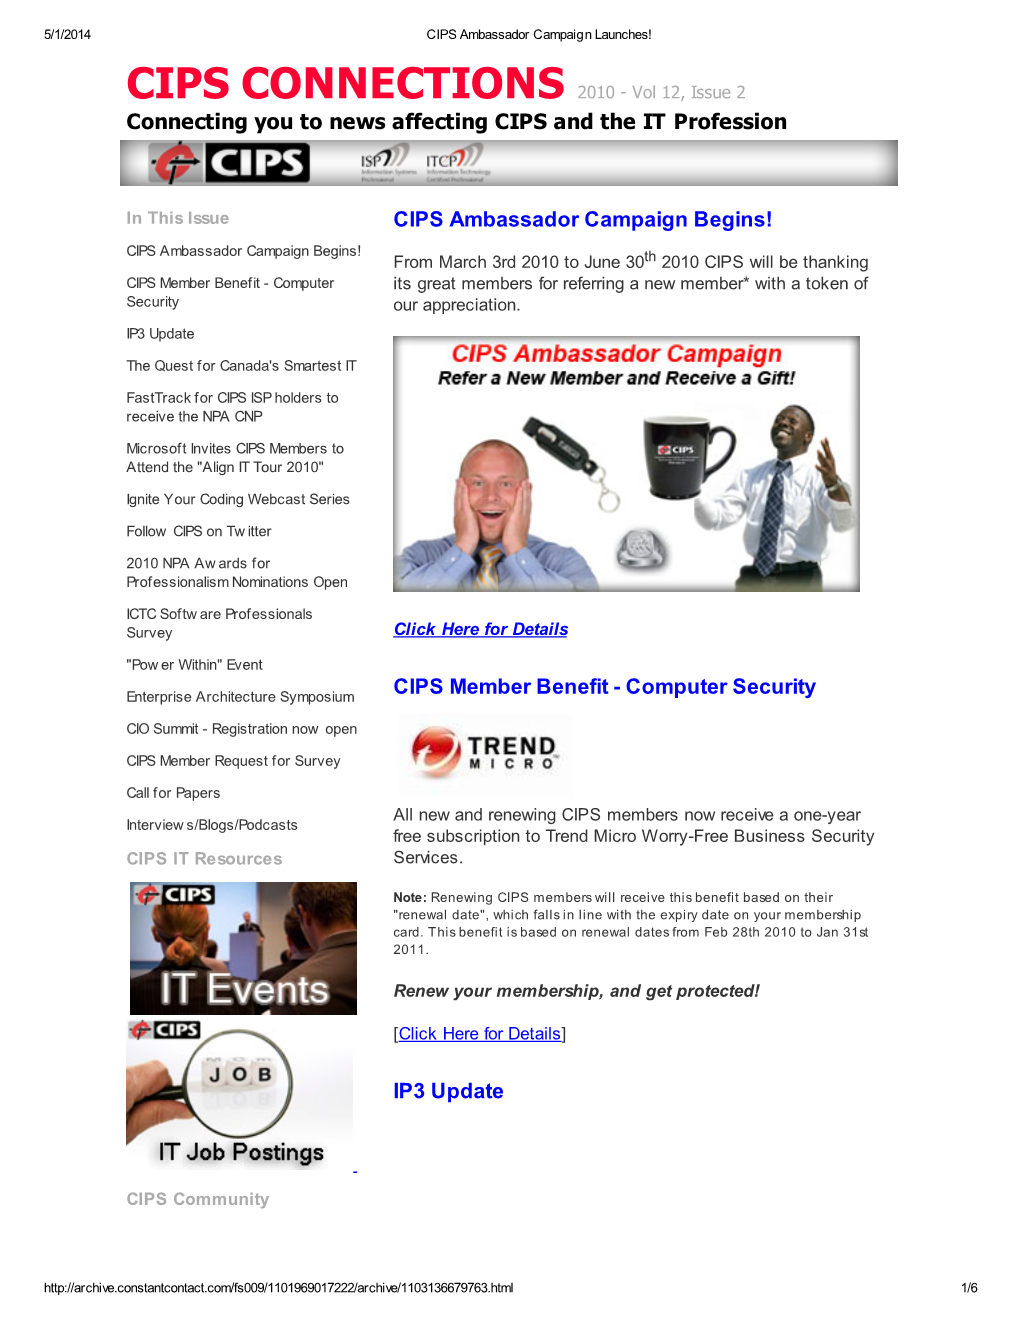 Connecting You to News Affecting CIPS and the IT Profession CIPS